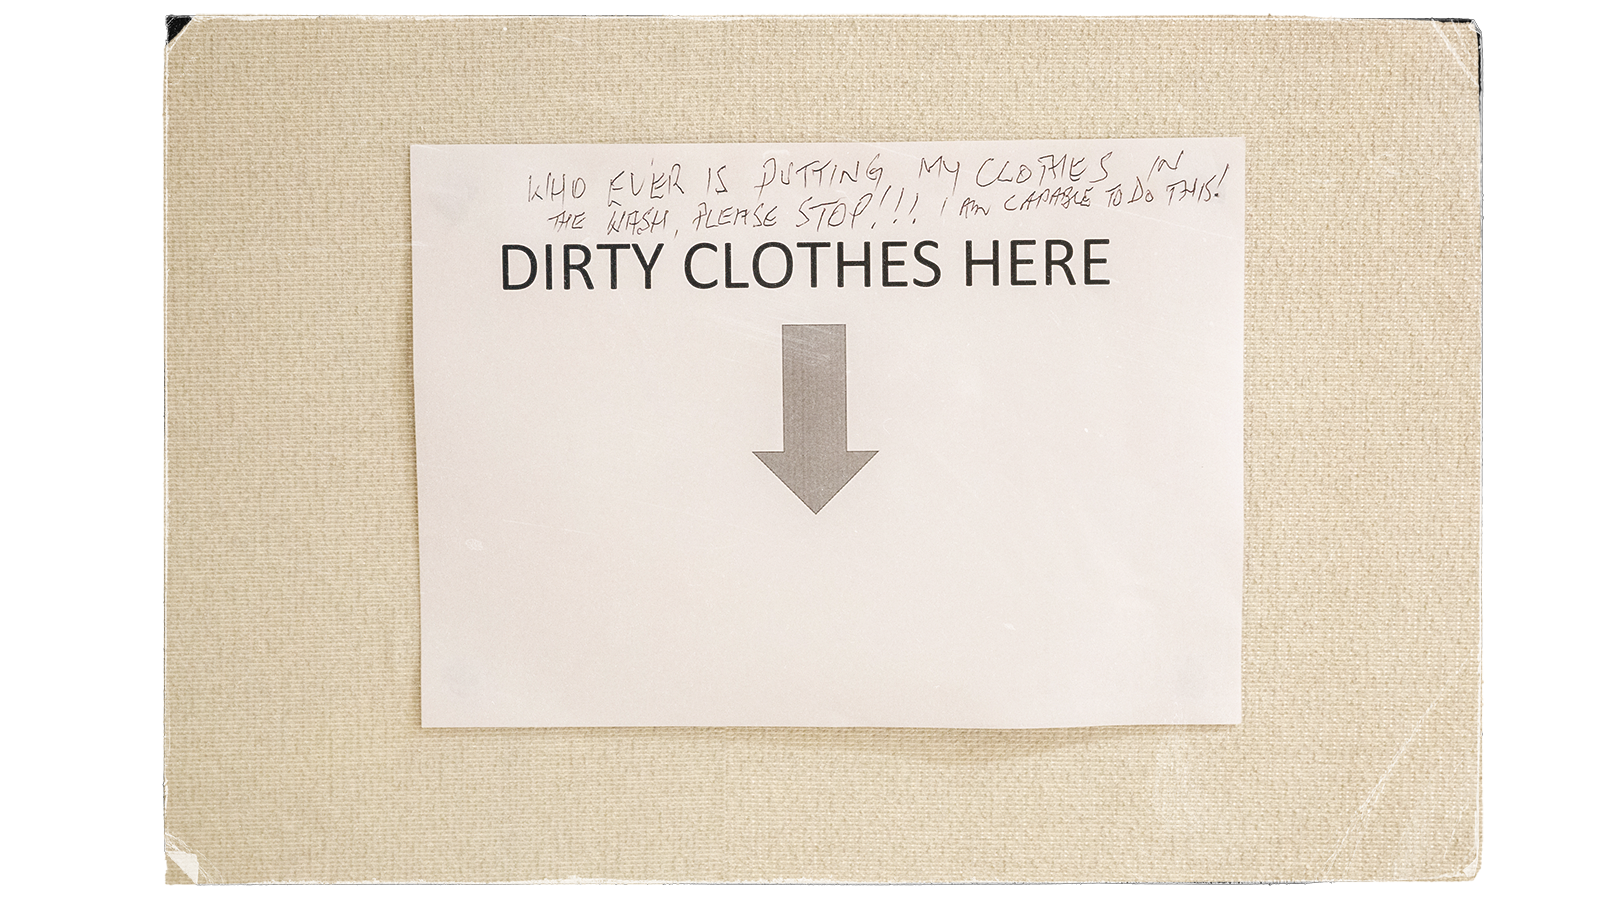 A sign reading "dirty clothes here" with an arrow and some handwriting on it